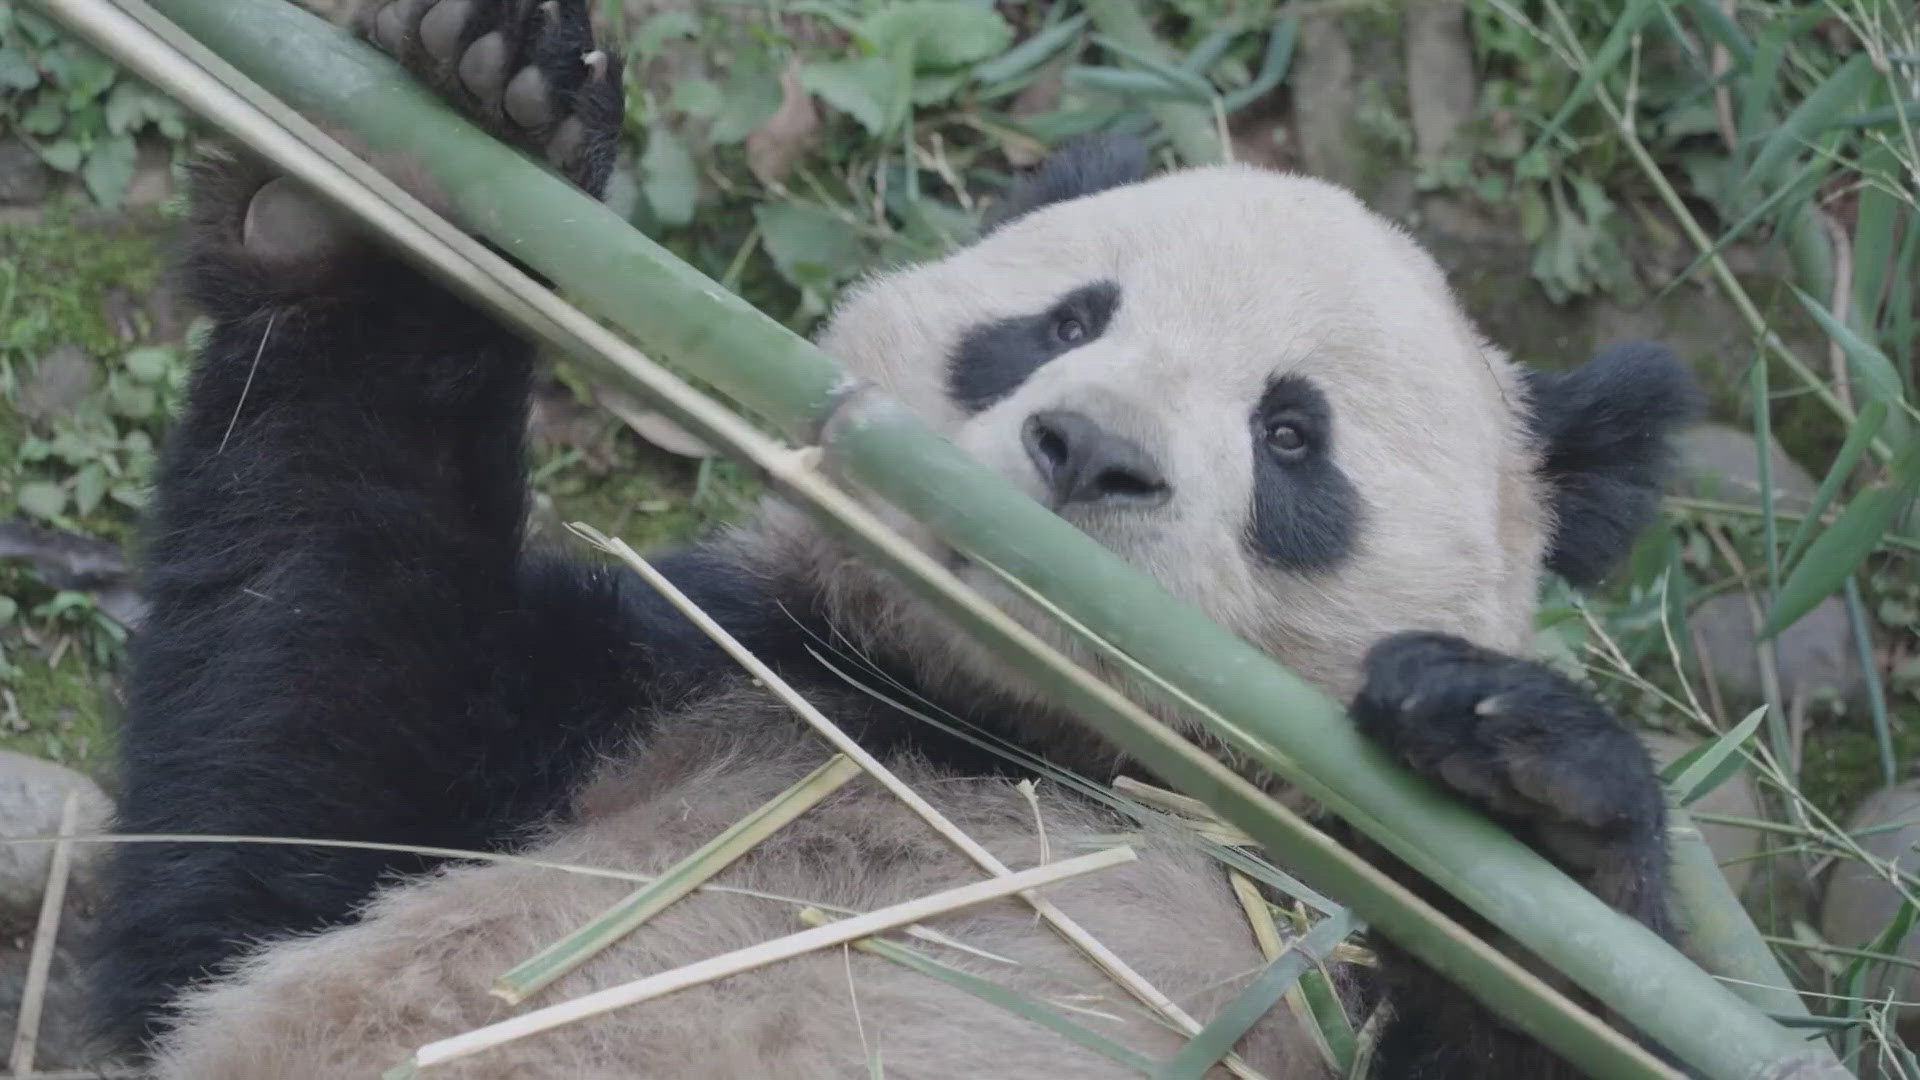 The zoo is busy preparing for XinBao and Yun Chuan's arrival. There will be a new expanded home for the pandas.